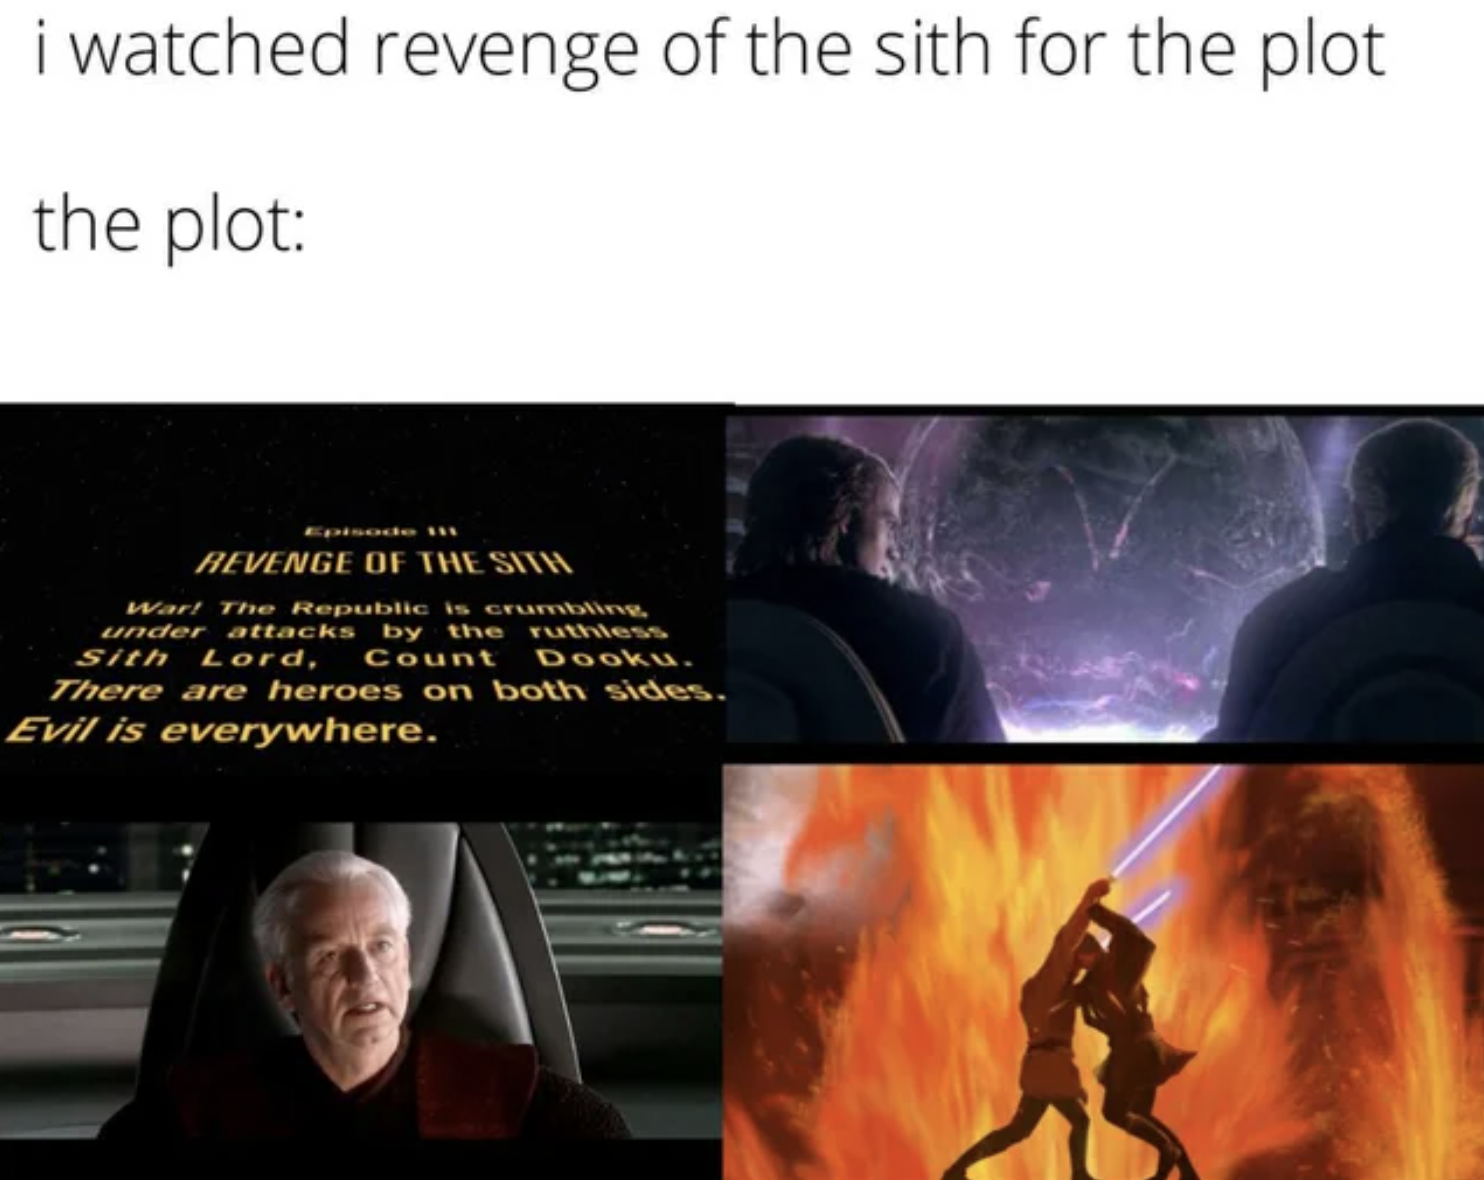 Memes that tell the truth - presentation - i watched revenge of the sith for the plot the plot Episode 111 Revenge Of The Sith Wart The Republic is crumbling under attacks by the ruthless Sith Lord, Count Dooku. There are heroes on both sides. Evil is eve